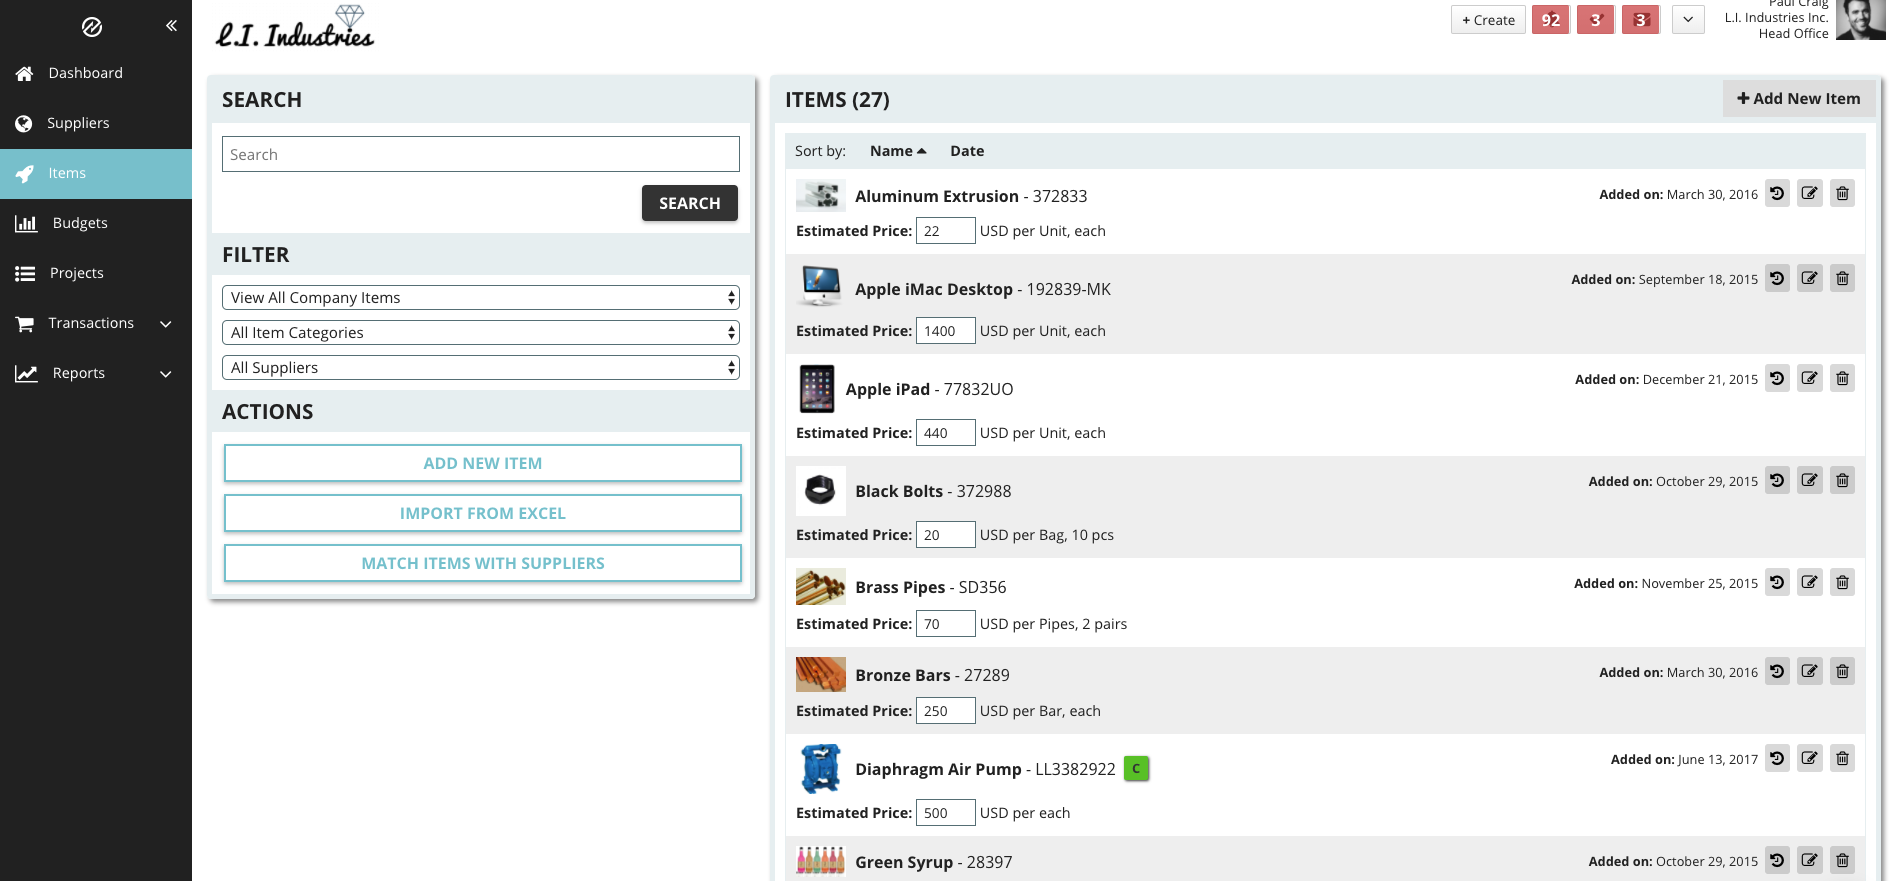 Tradogram Software - Host your items catalog to track what's being purchased.